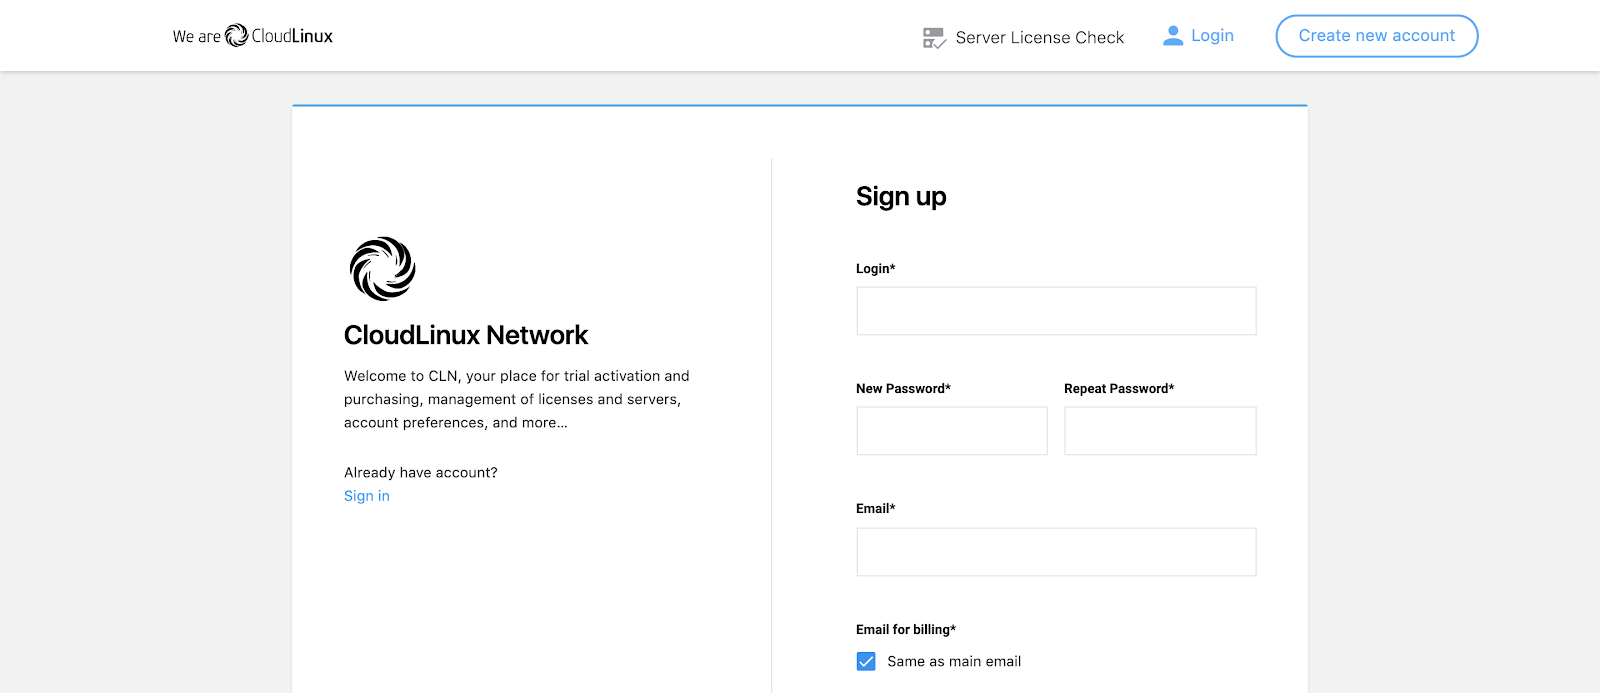 CloudLinux Network Sign Up Page